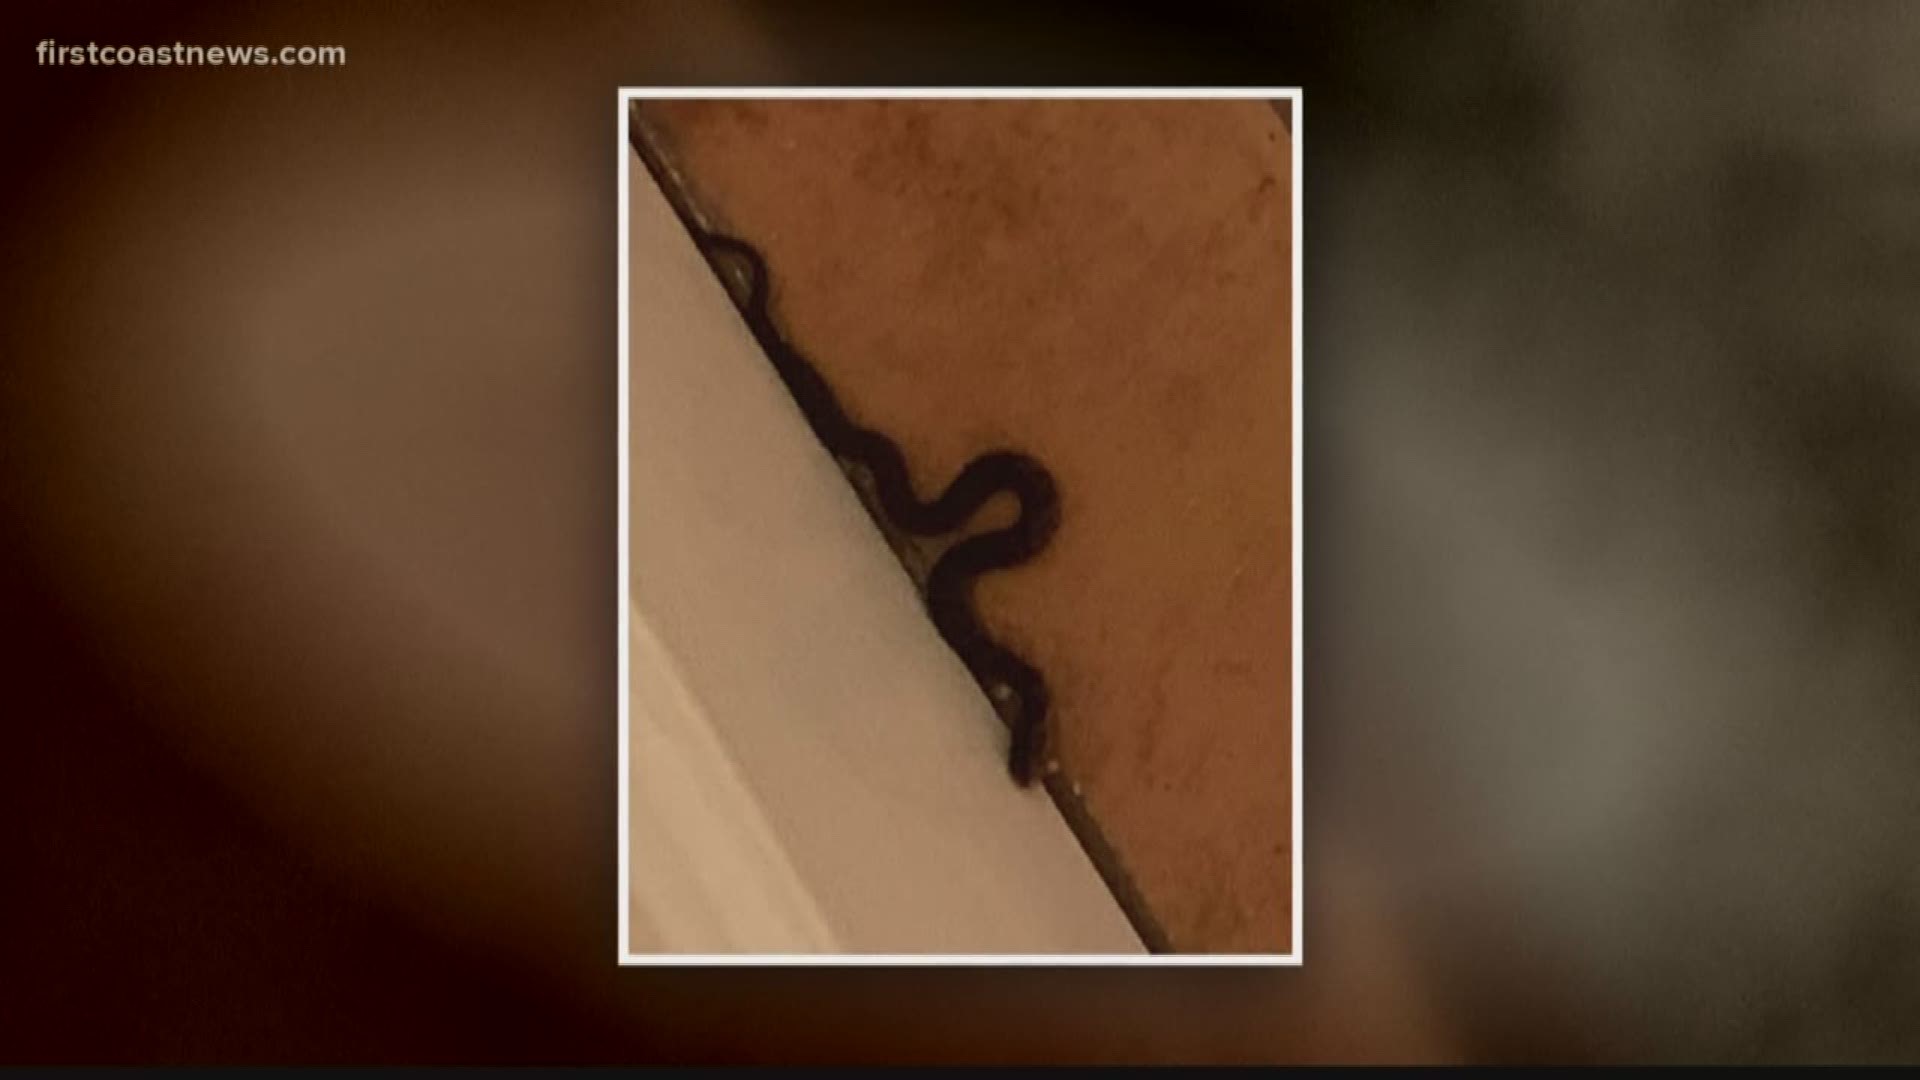 A couple was in Orlando to celebrate a birthday and came face-to-face with what she fears, a snake.